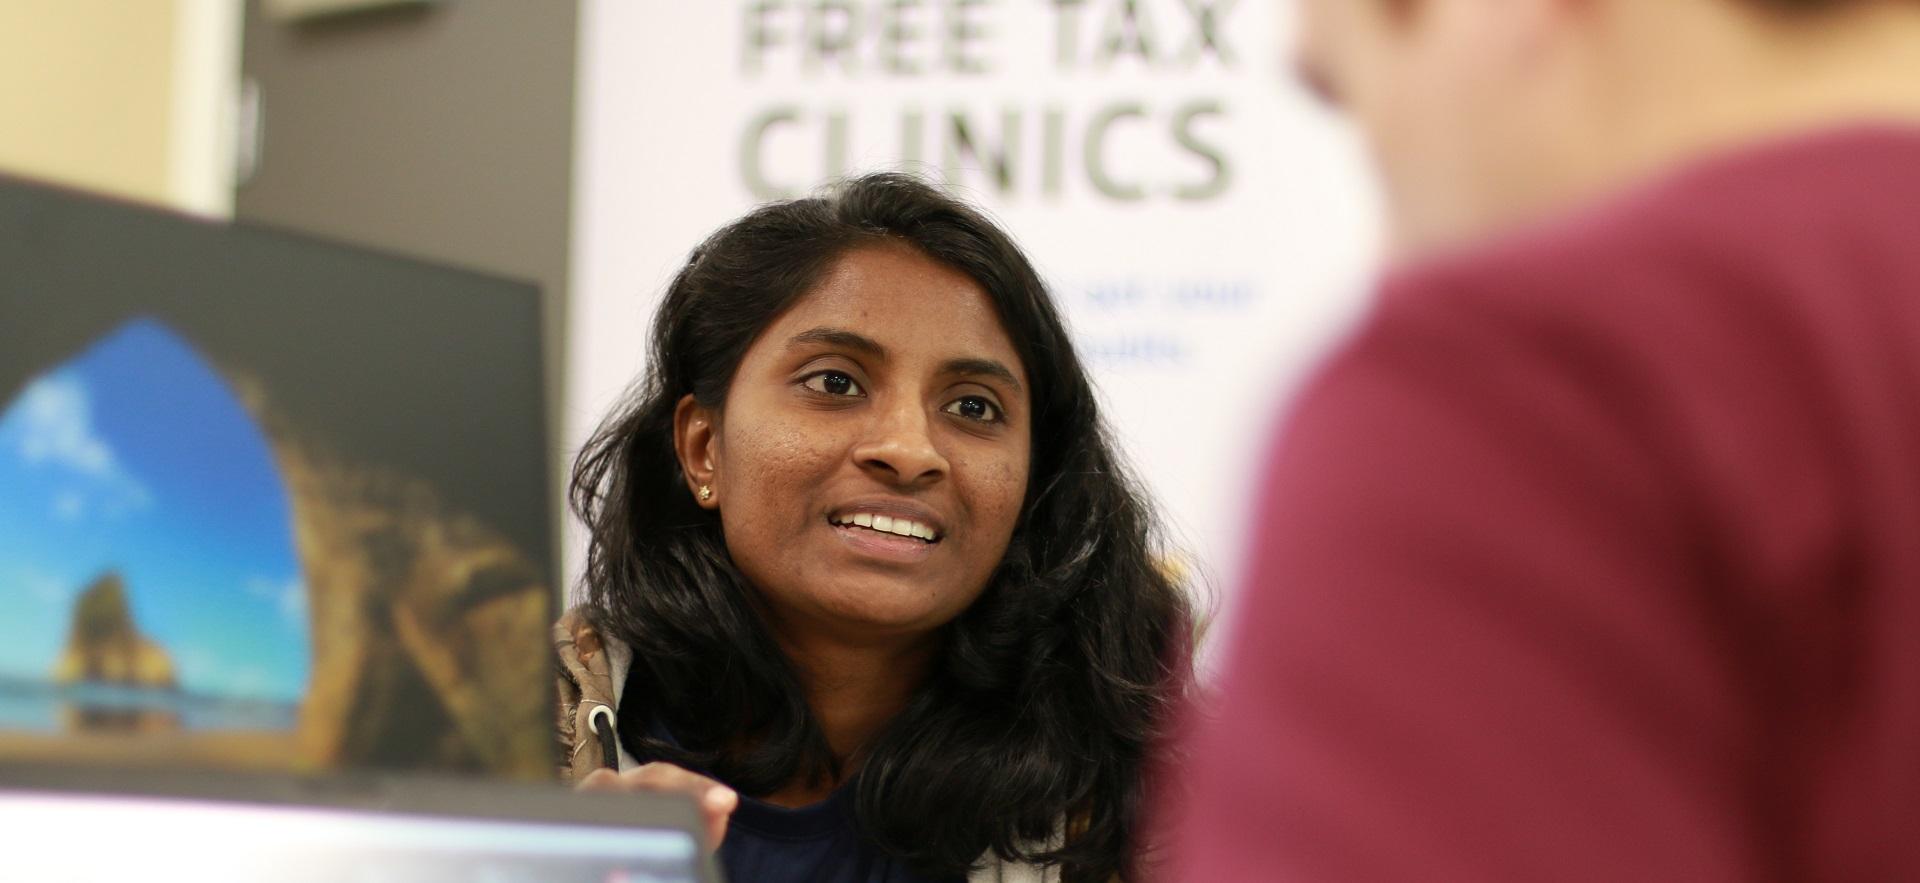 Business student helping fellow student during the free tax clinic